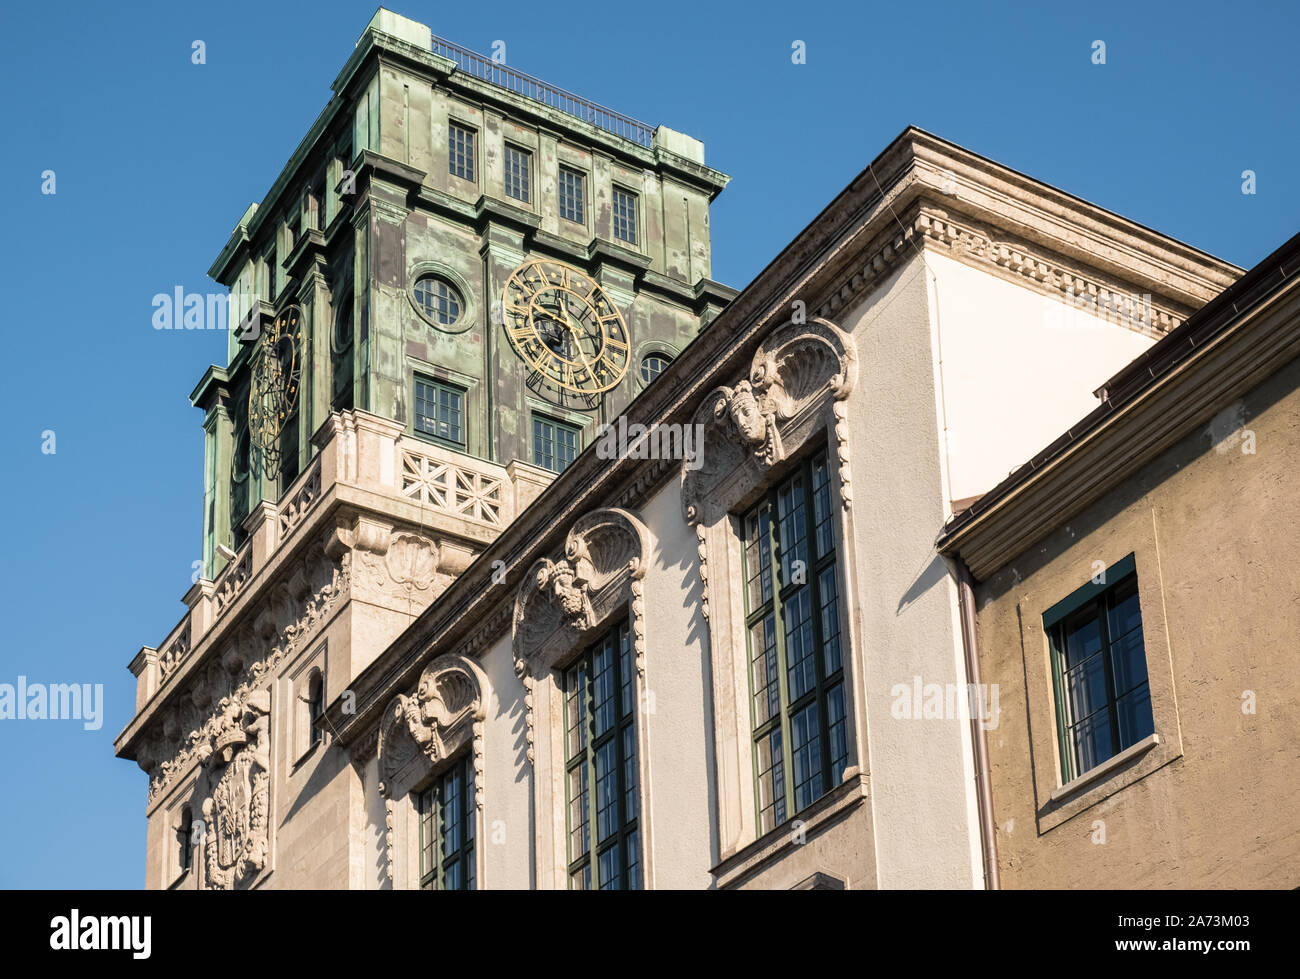 Munich, Bavaria, Germany. The ornate clock tower of the Technical University of Munich main campus building on Gabelsbergerstraße. Stock Photo